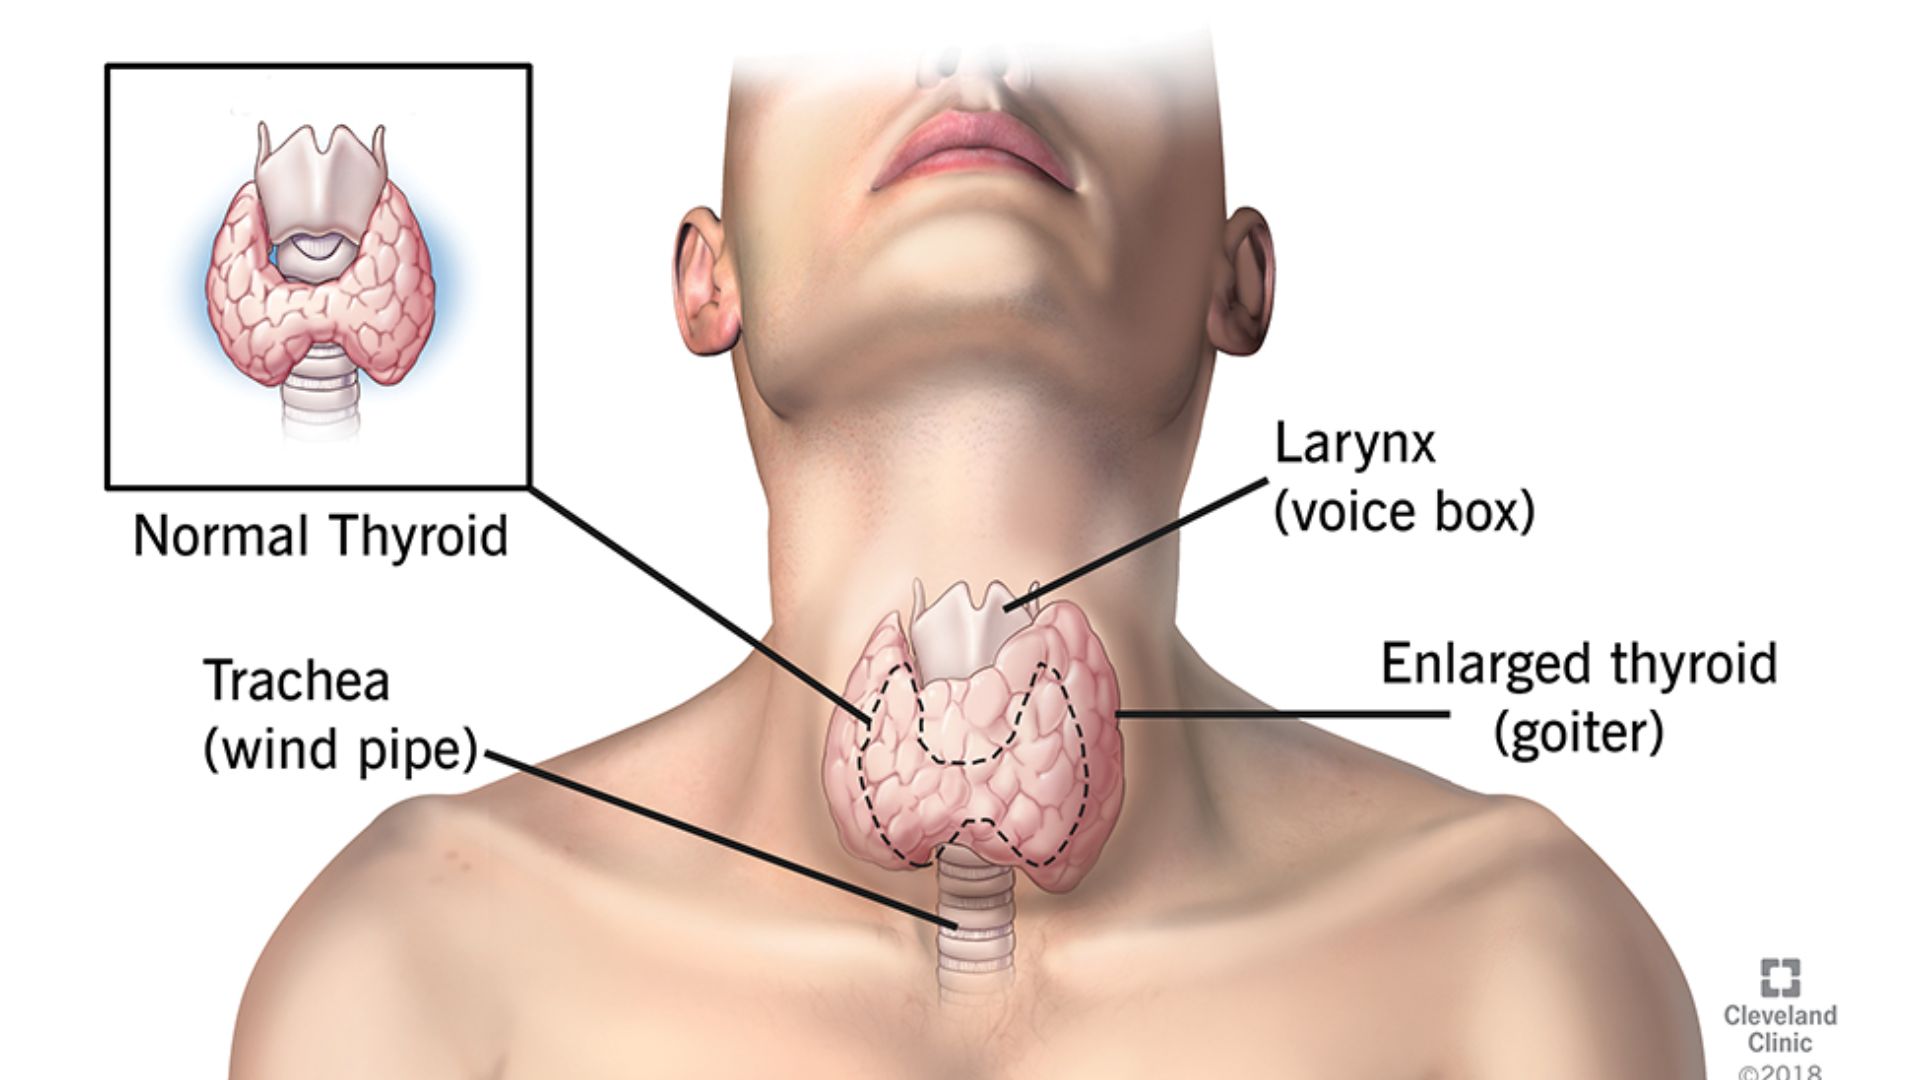 Hypothyroidism caused by Hashimoto’s thyroiditis is more common than you think